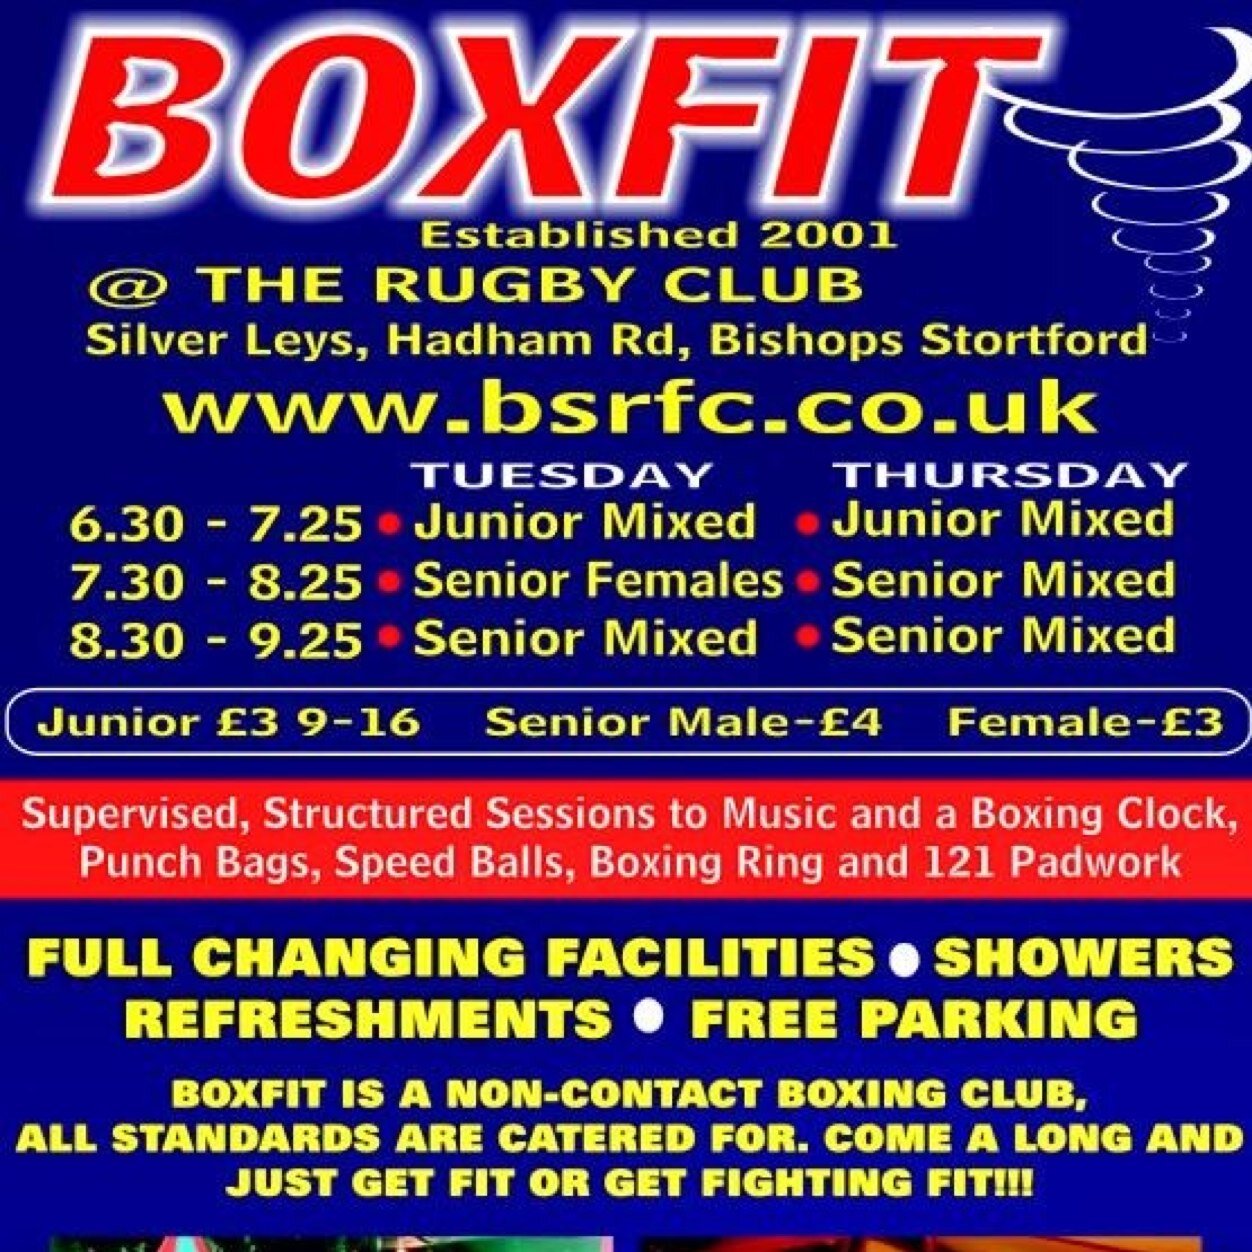 • Boxfit is a non-contact boxing club • All standards are catered for • Come along and just get fit or get FIGHTING FIT! • Call now for more info: 07989438422